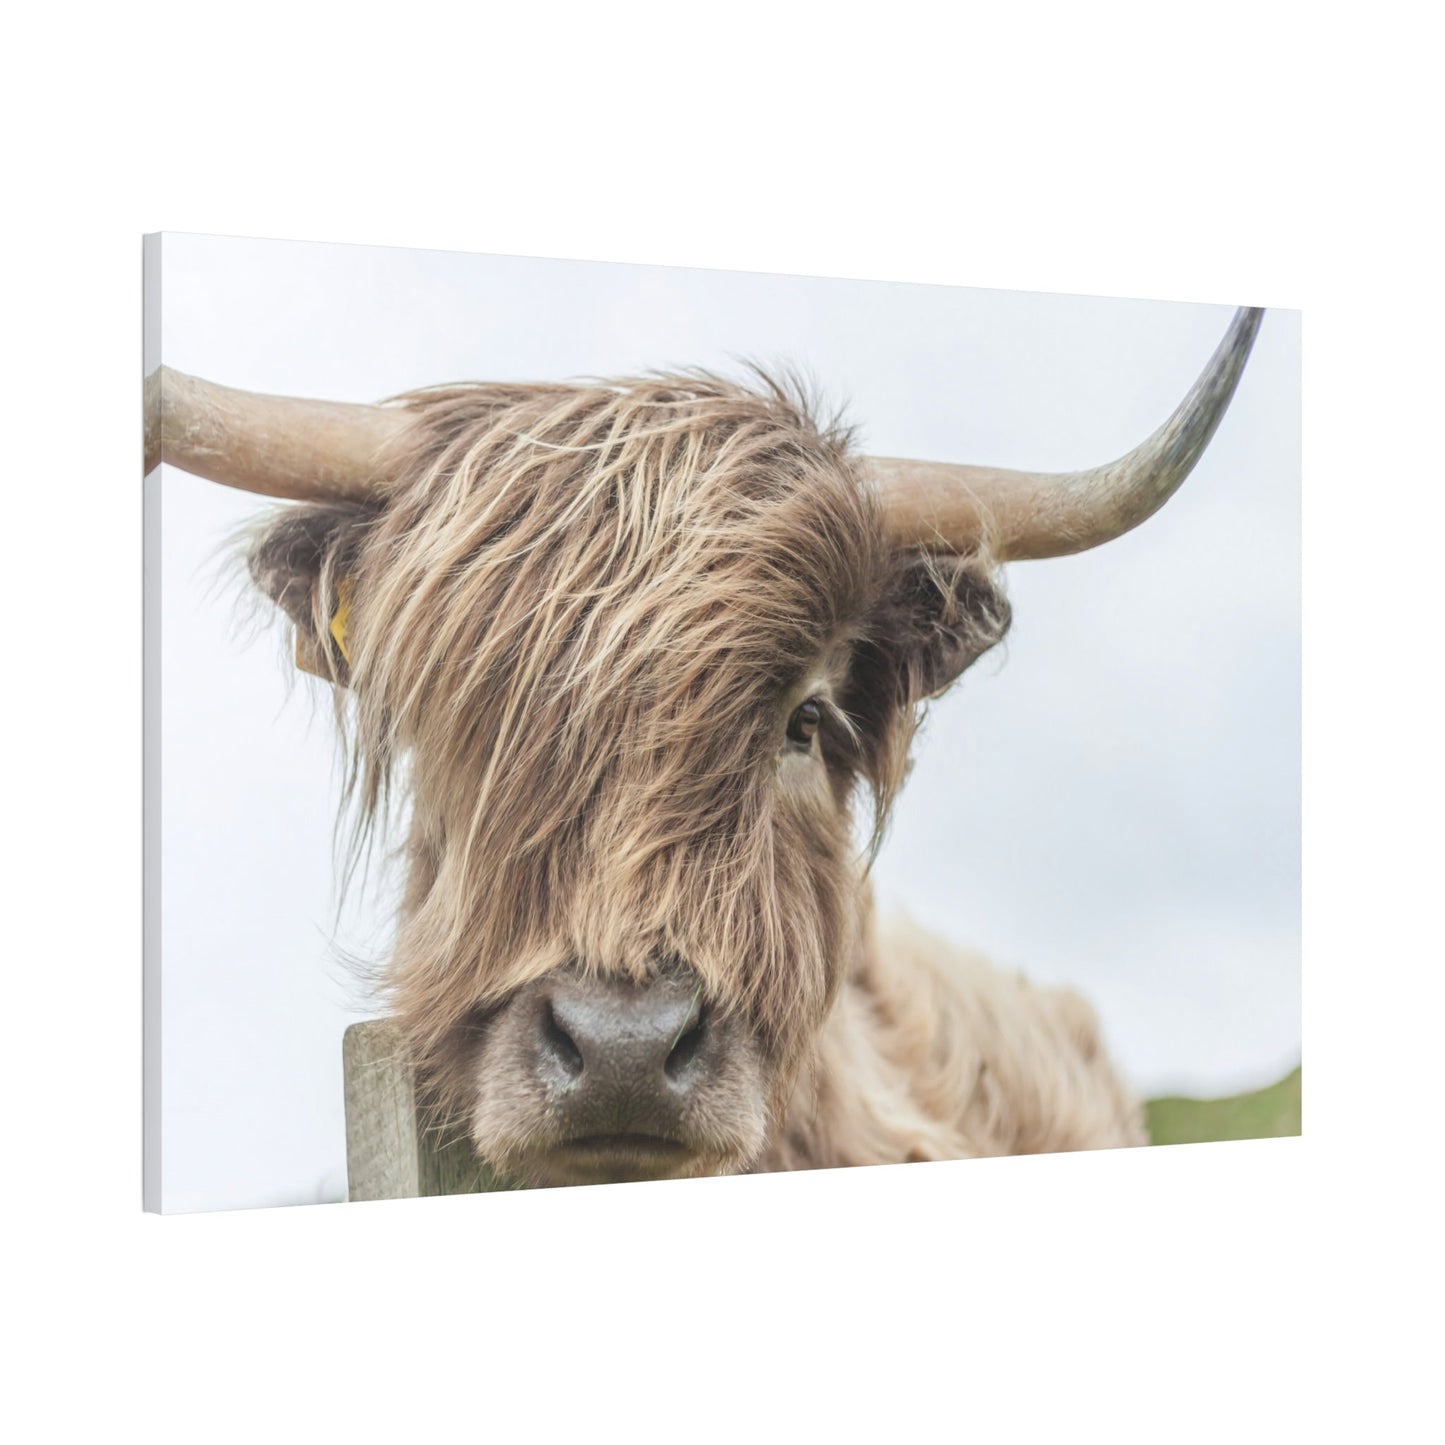 Wilderness Wonder: Wall Art on Canvas of a Majestic Highland Cow in the Wild